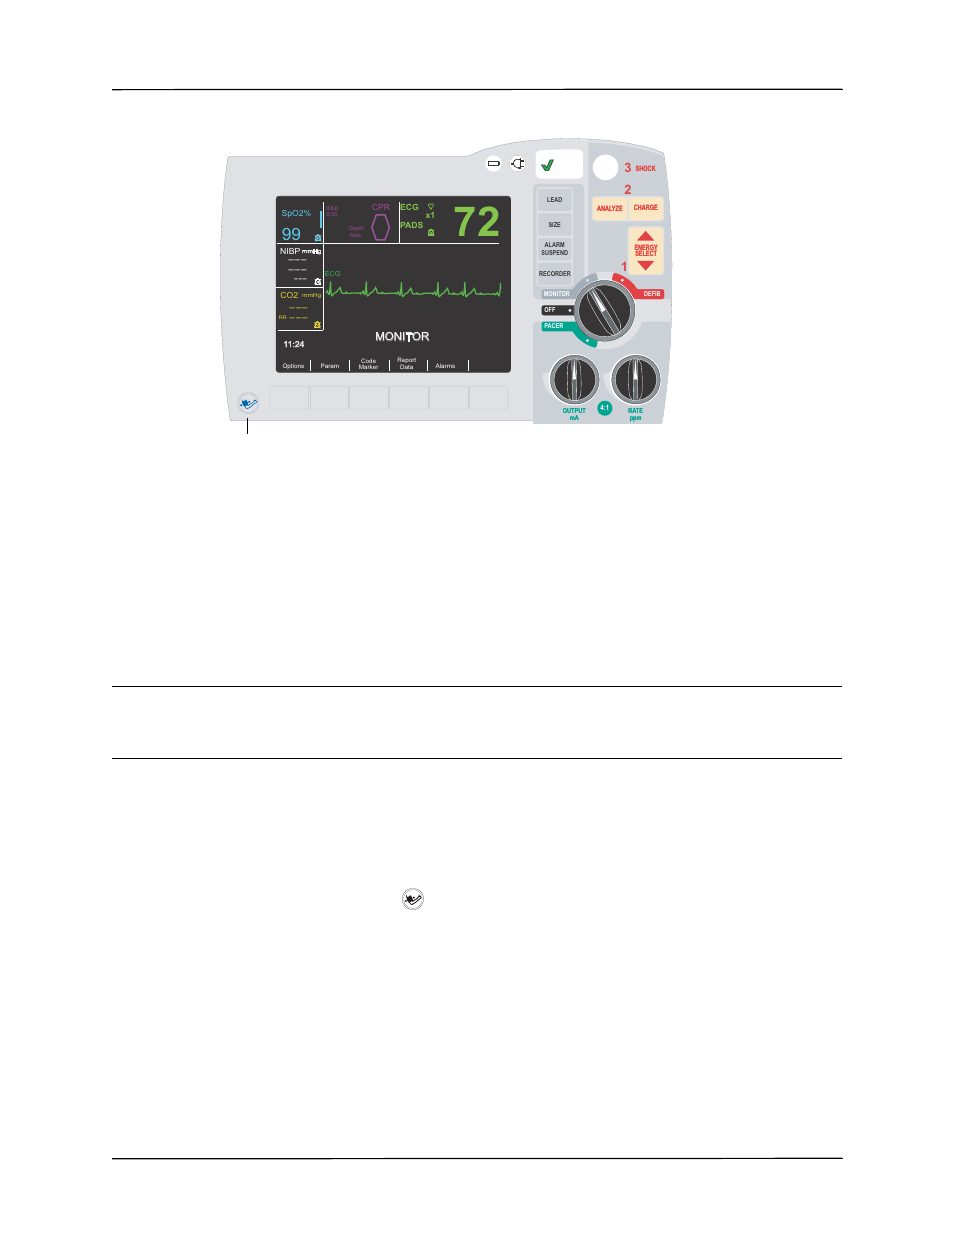 Taking stat measurements, Taking measurements, Starting stat measurements | Aborting stat measurements, Press the nibp button | ZOLL R Series Monitor Defibrillator Rev A NIBP User Manual | Page 19 / 28